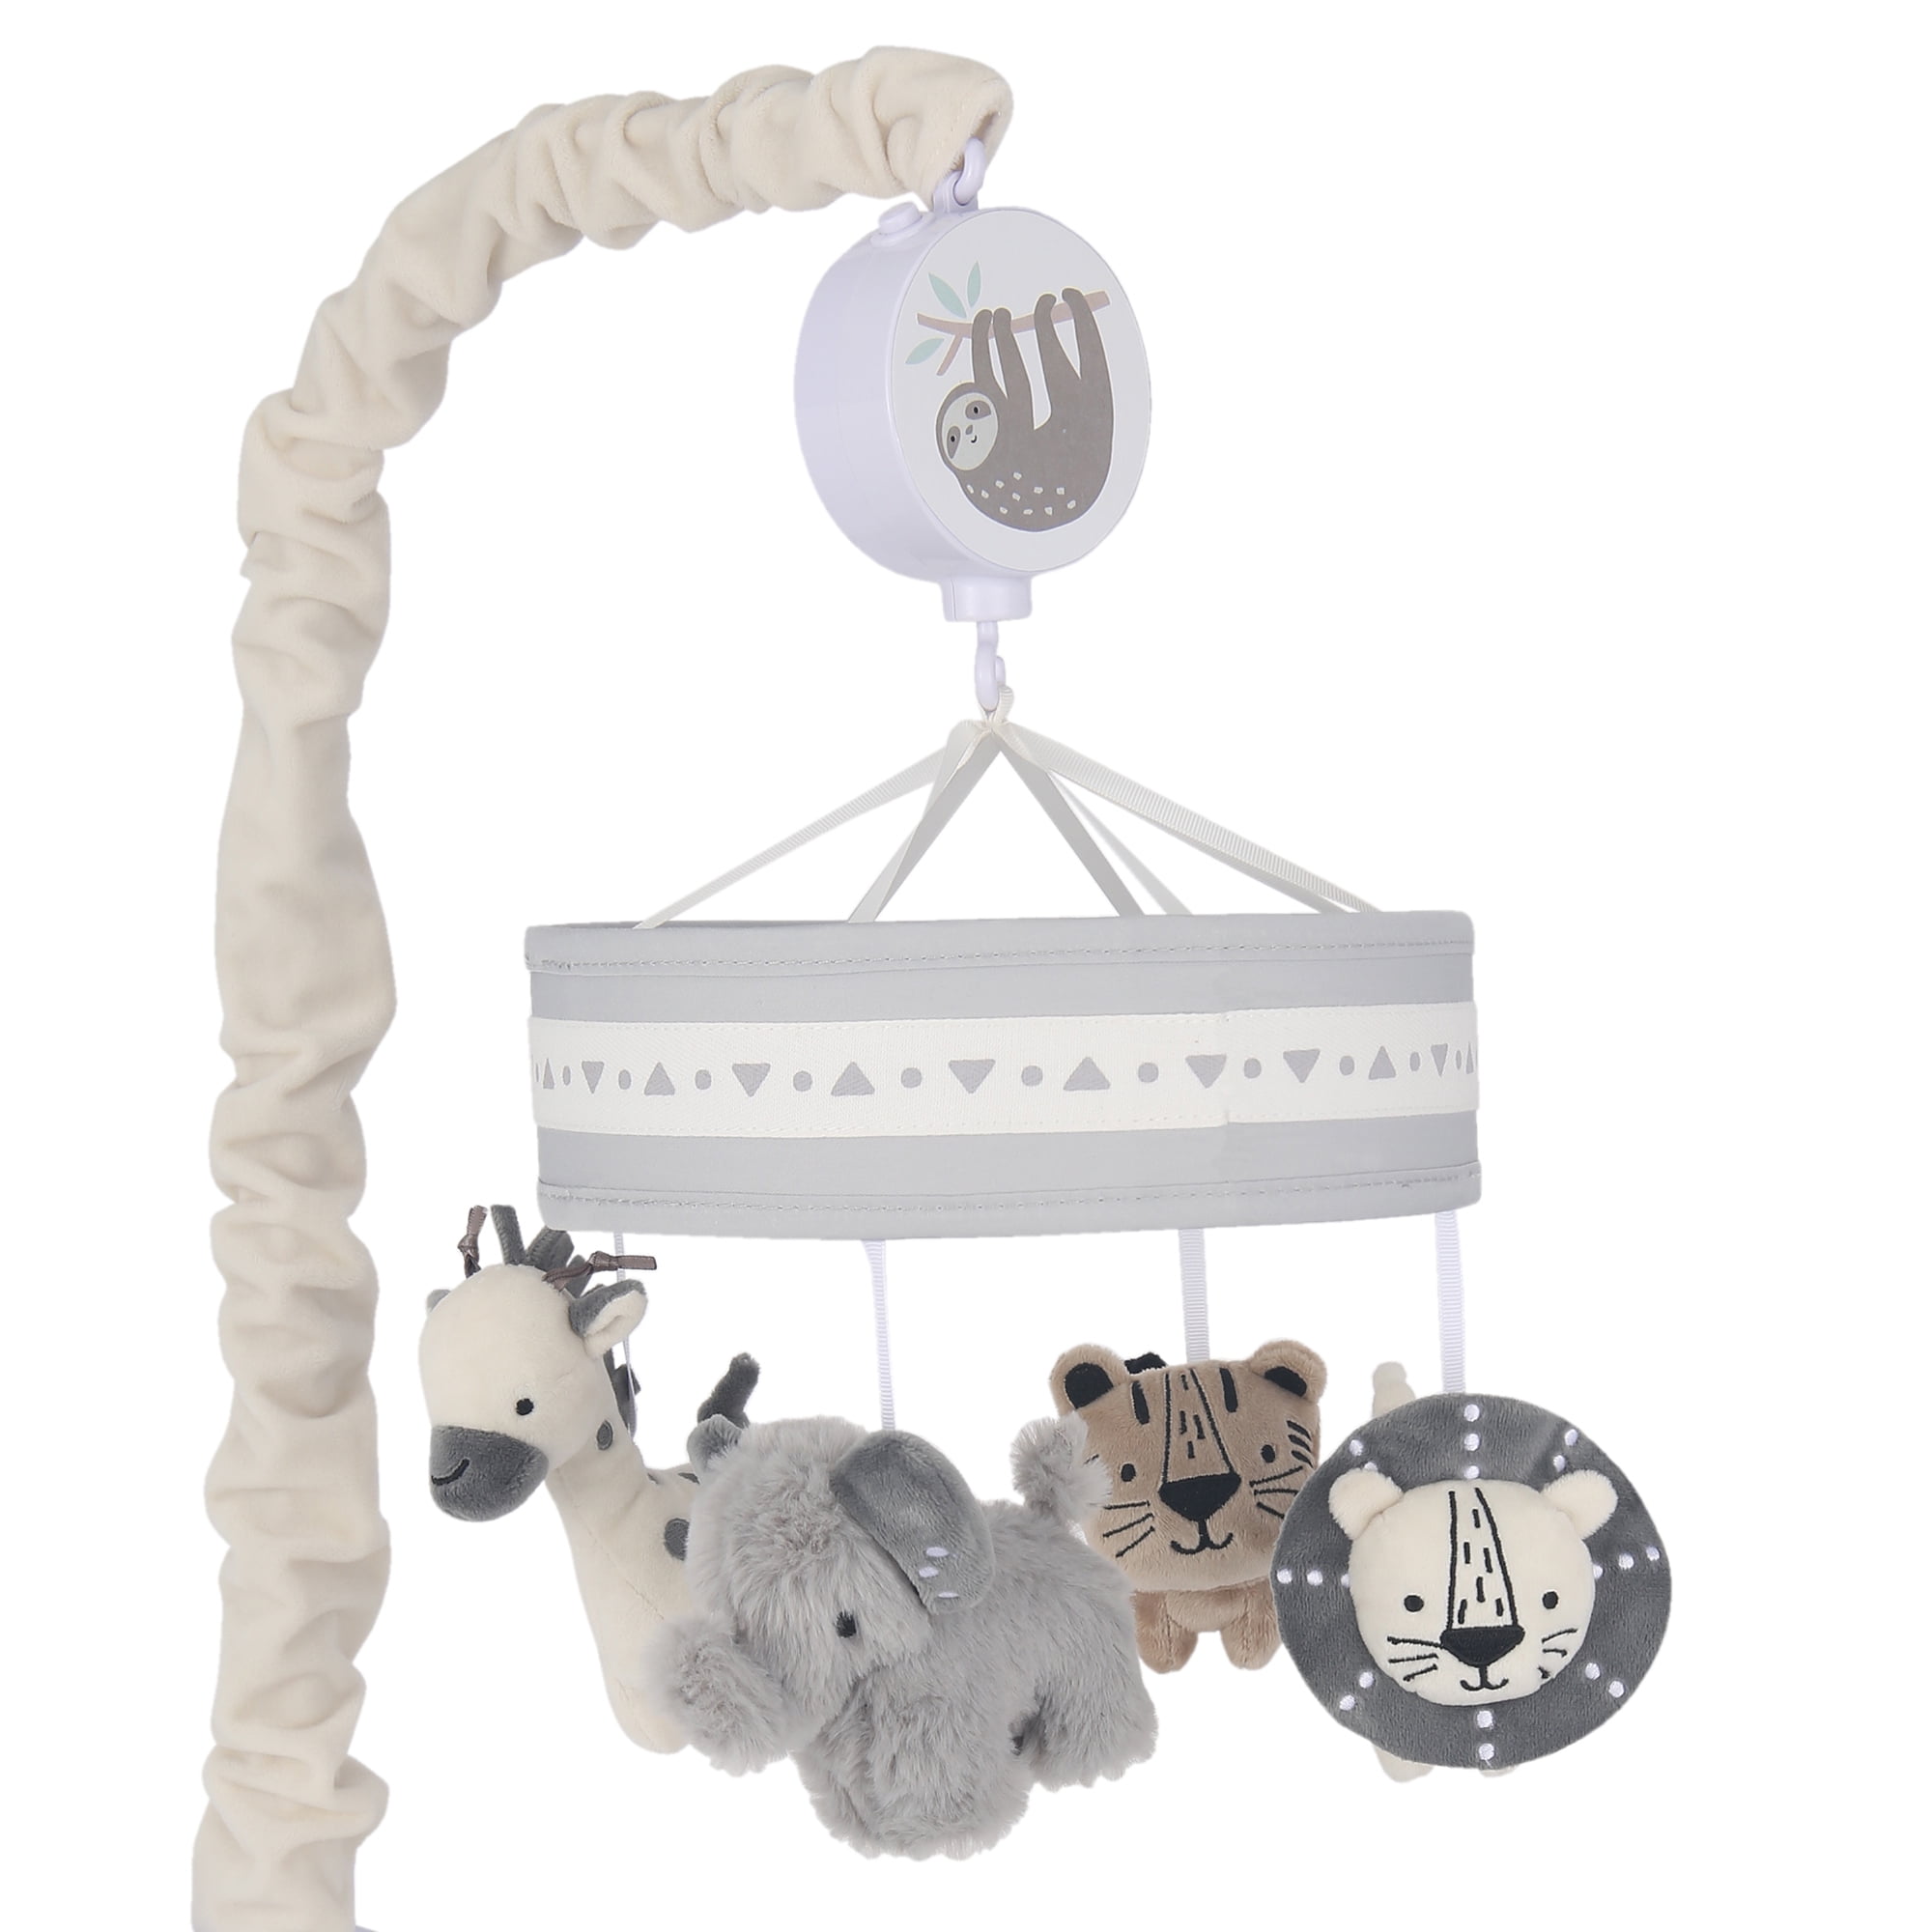 Lambs & Ivy Baby Jungle Animals Gray/Tan Musical Crib Mobile Soother Toy 